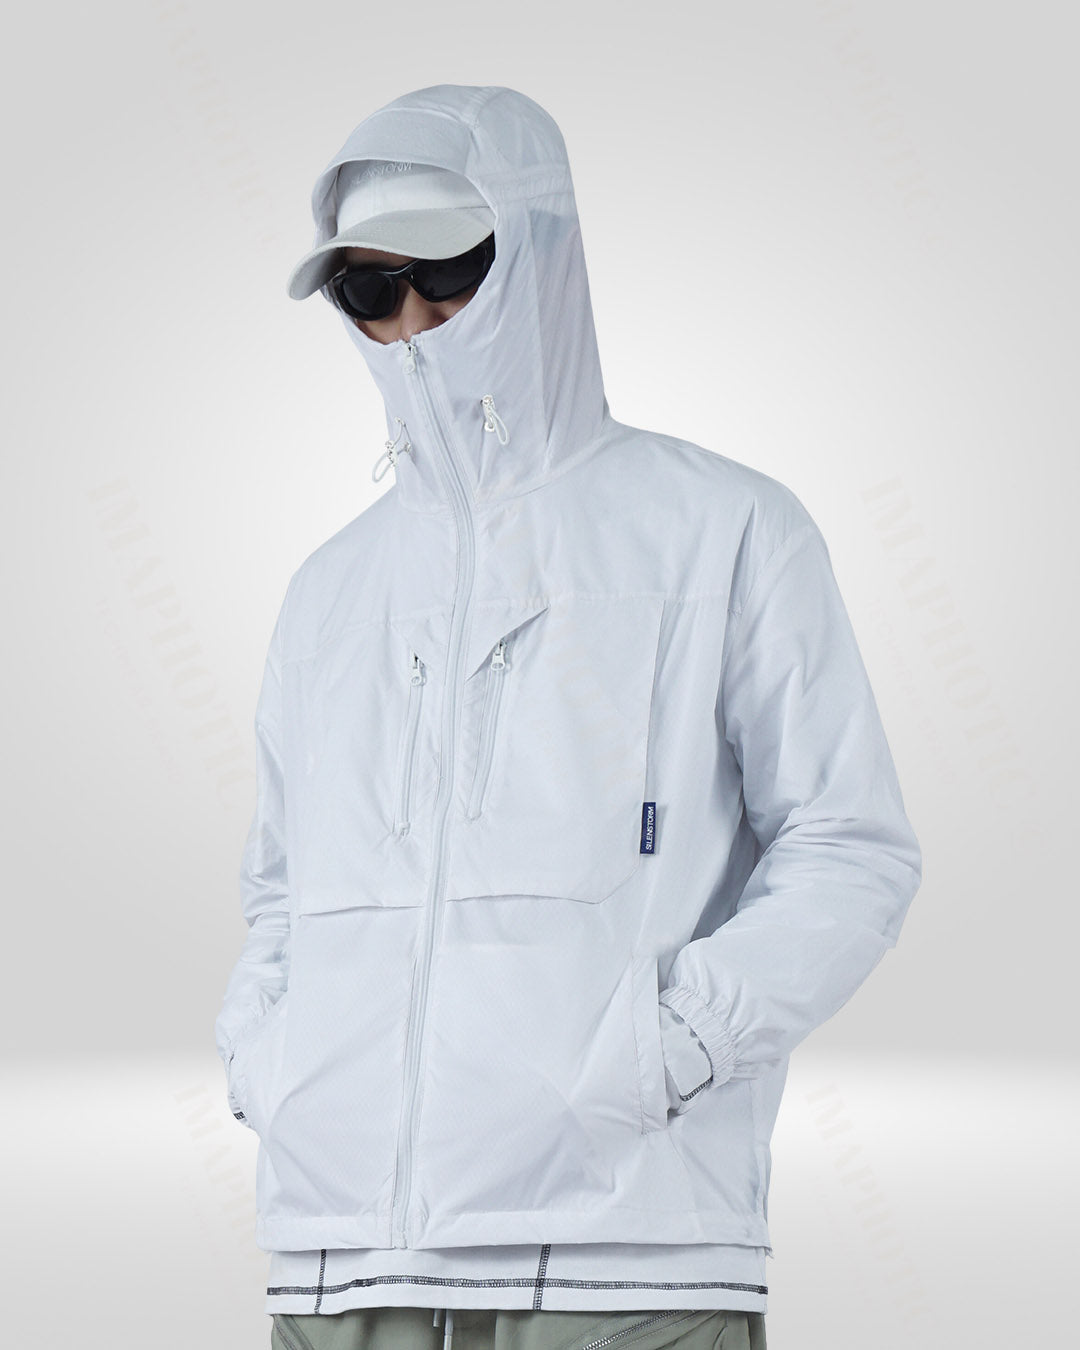 White Sun Protective Jacket - Lightweight UV Protection Gear for All